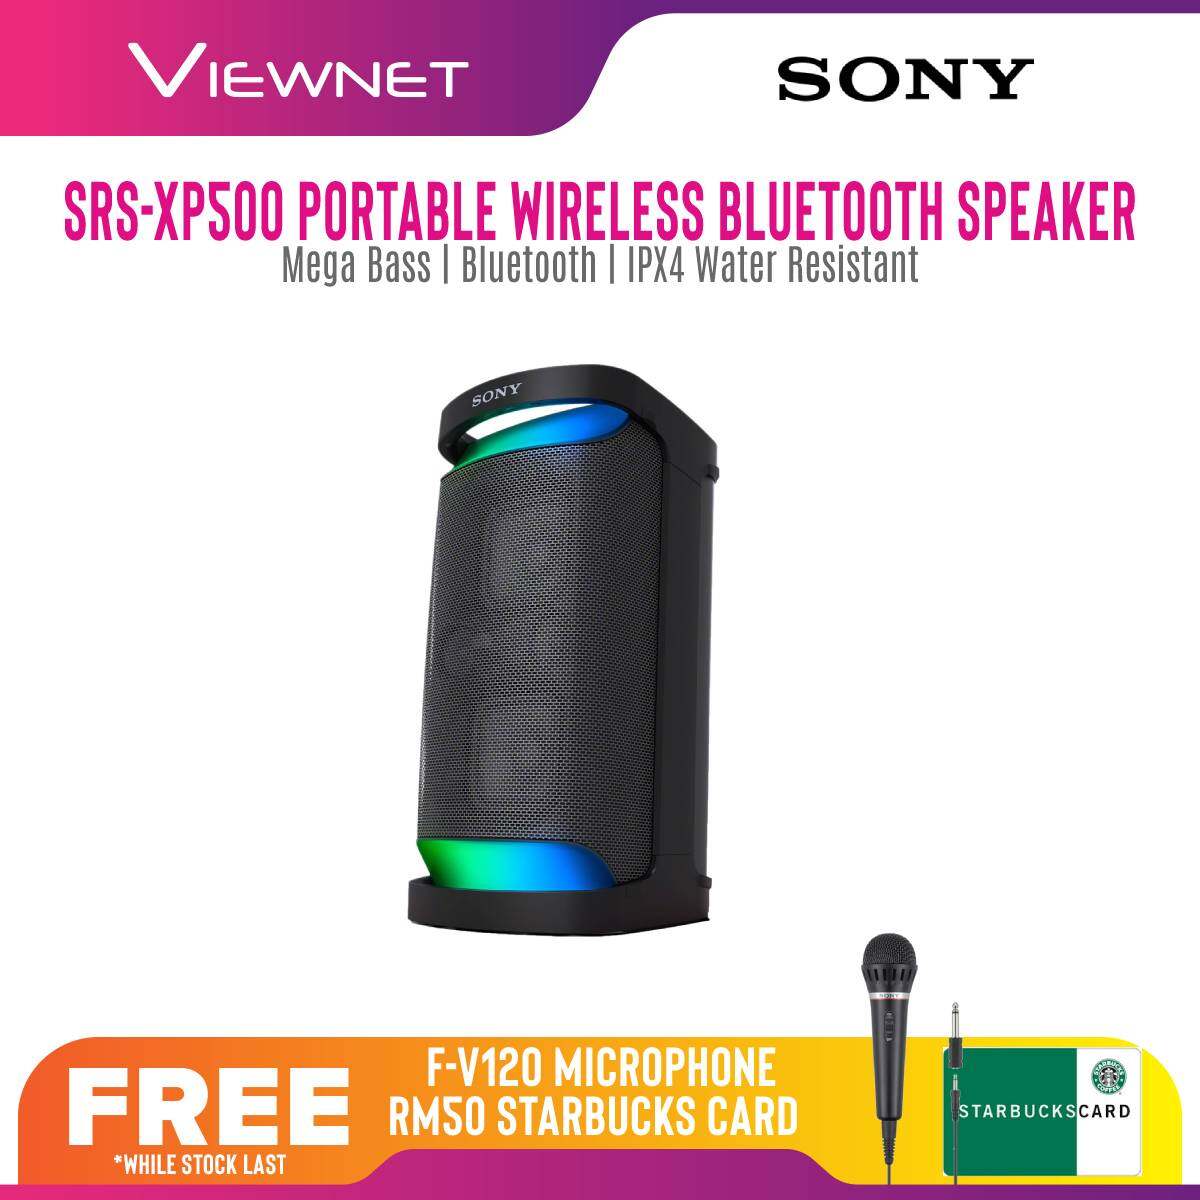 [PRE-ORDER] [NEW LAUNCH] Sony SRS-XP500 Series Portable Wireless Bluetooth Speaker with Extra Bass , IPX Water Resistant + (Free Gifts: F-V120 Microphone + RM50 Starbucks Card(While Stock Last ) (ETA: 2021-08-04)